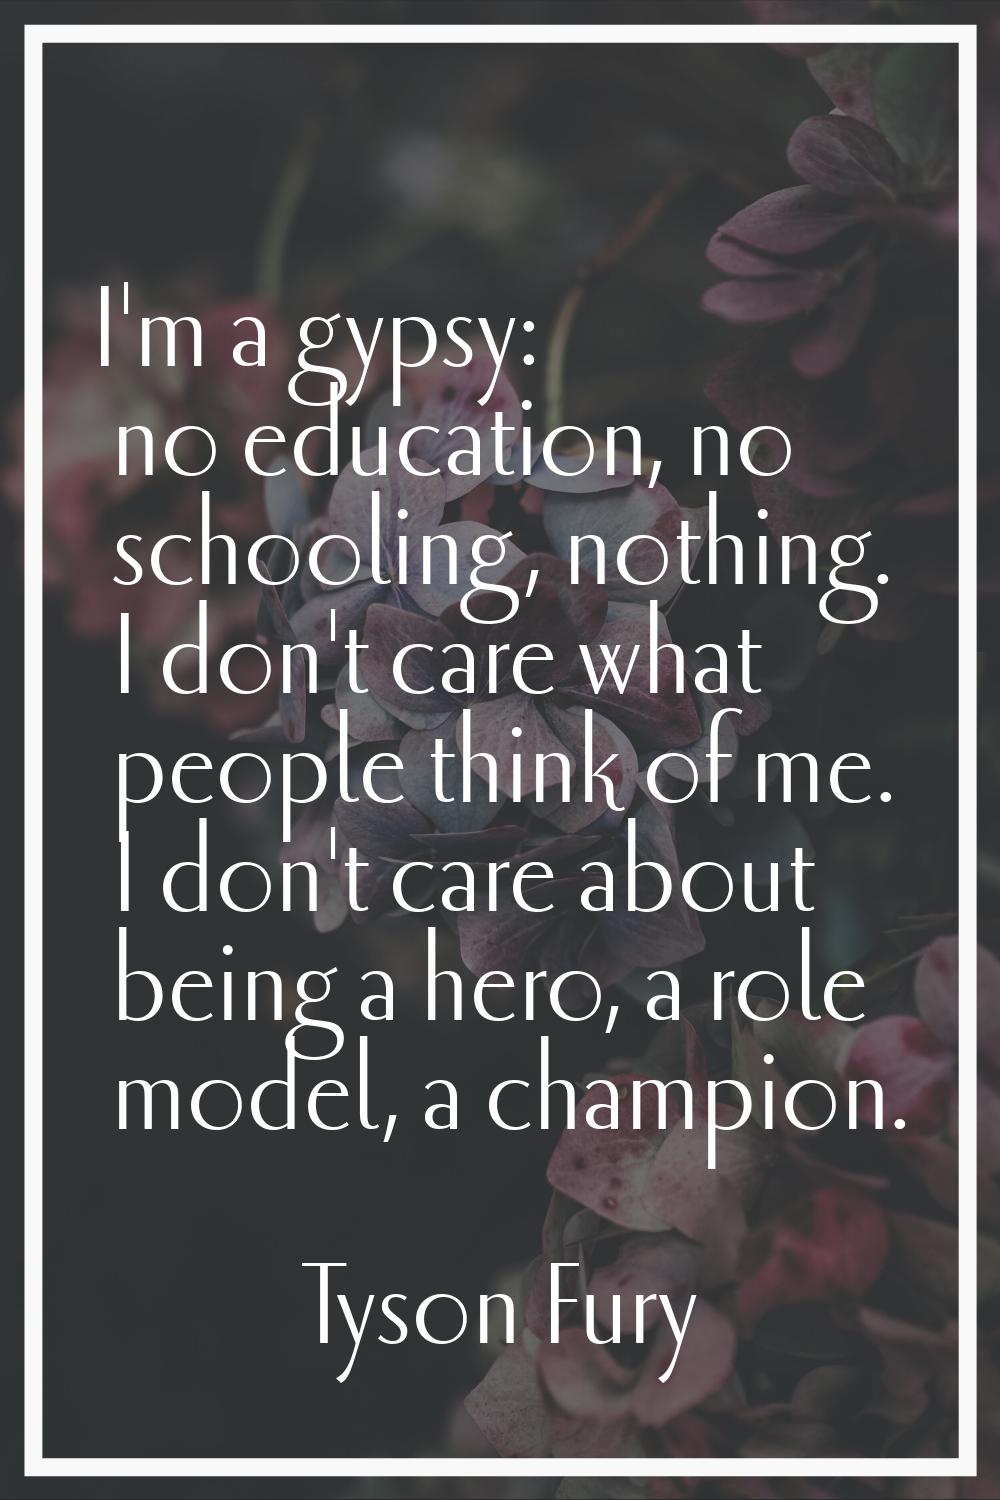 I'm a gypsy: no education, no schooling, nothing. I don't care what people think of me. I don't car